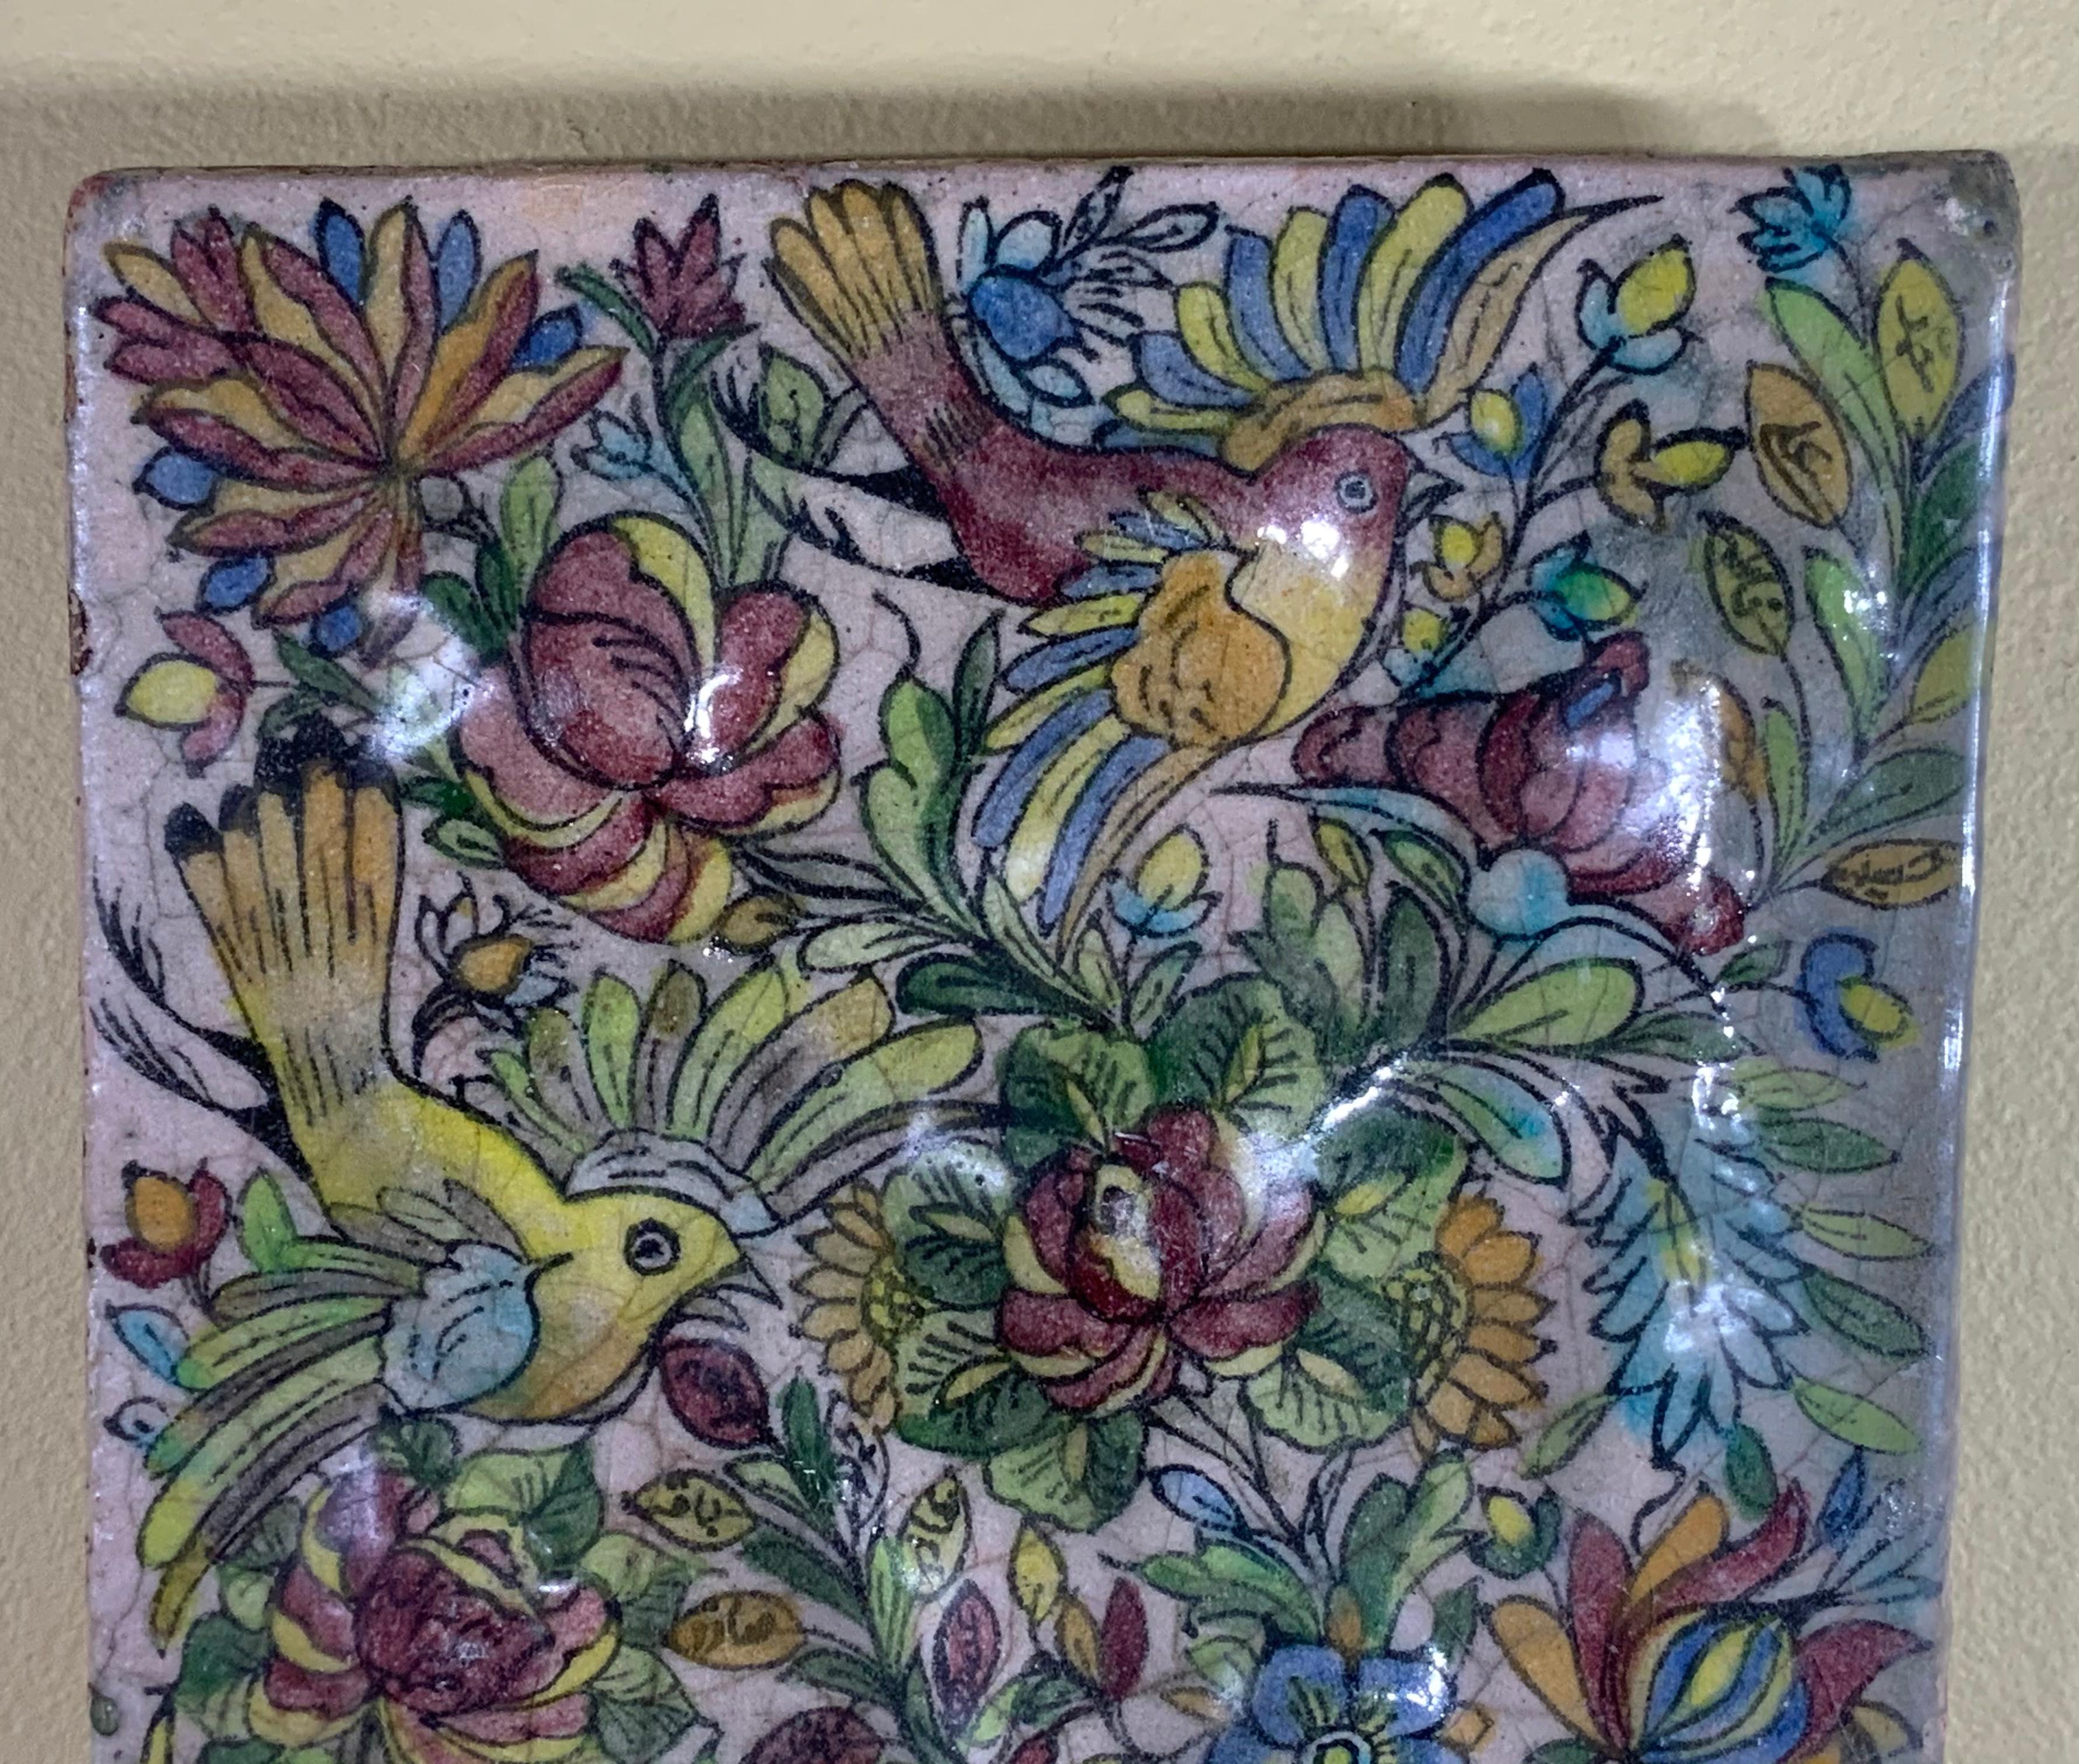 Exceptional tile all hand-painted and glazed with beautiful scenery of birds flying between colorful vines and flowers on a cream color background. Could hang on the wall.
Great object of art for wall display.

 